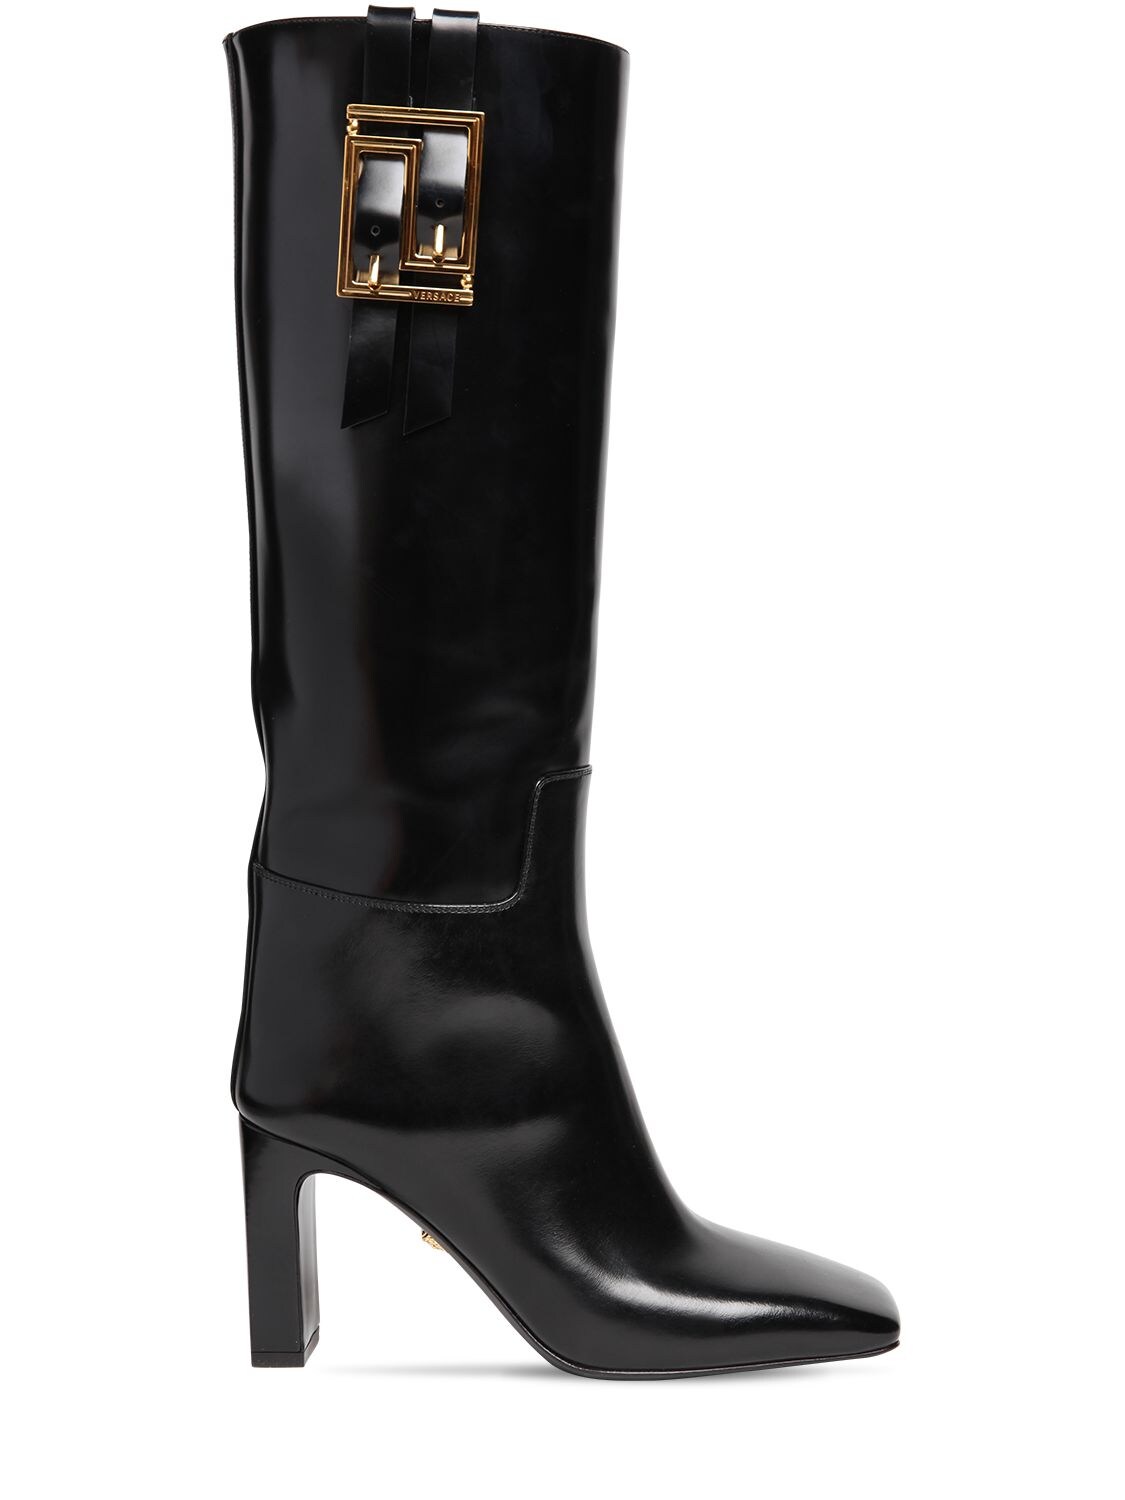 VERSACE 85MM BRUSHED LEATHER TALL BOOTS,72IWTY002-RDQXT0G1